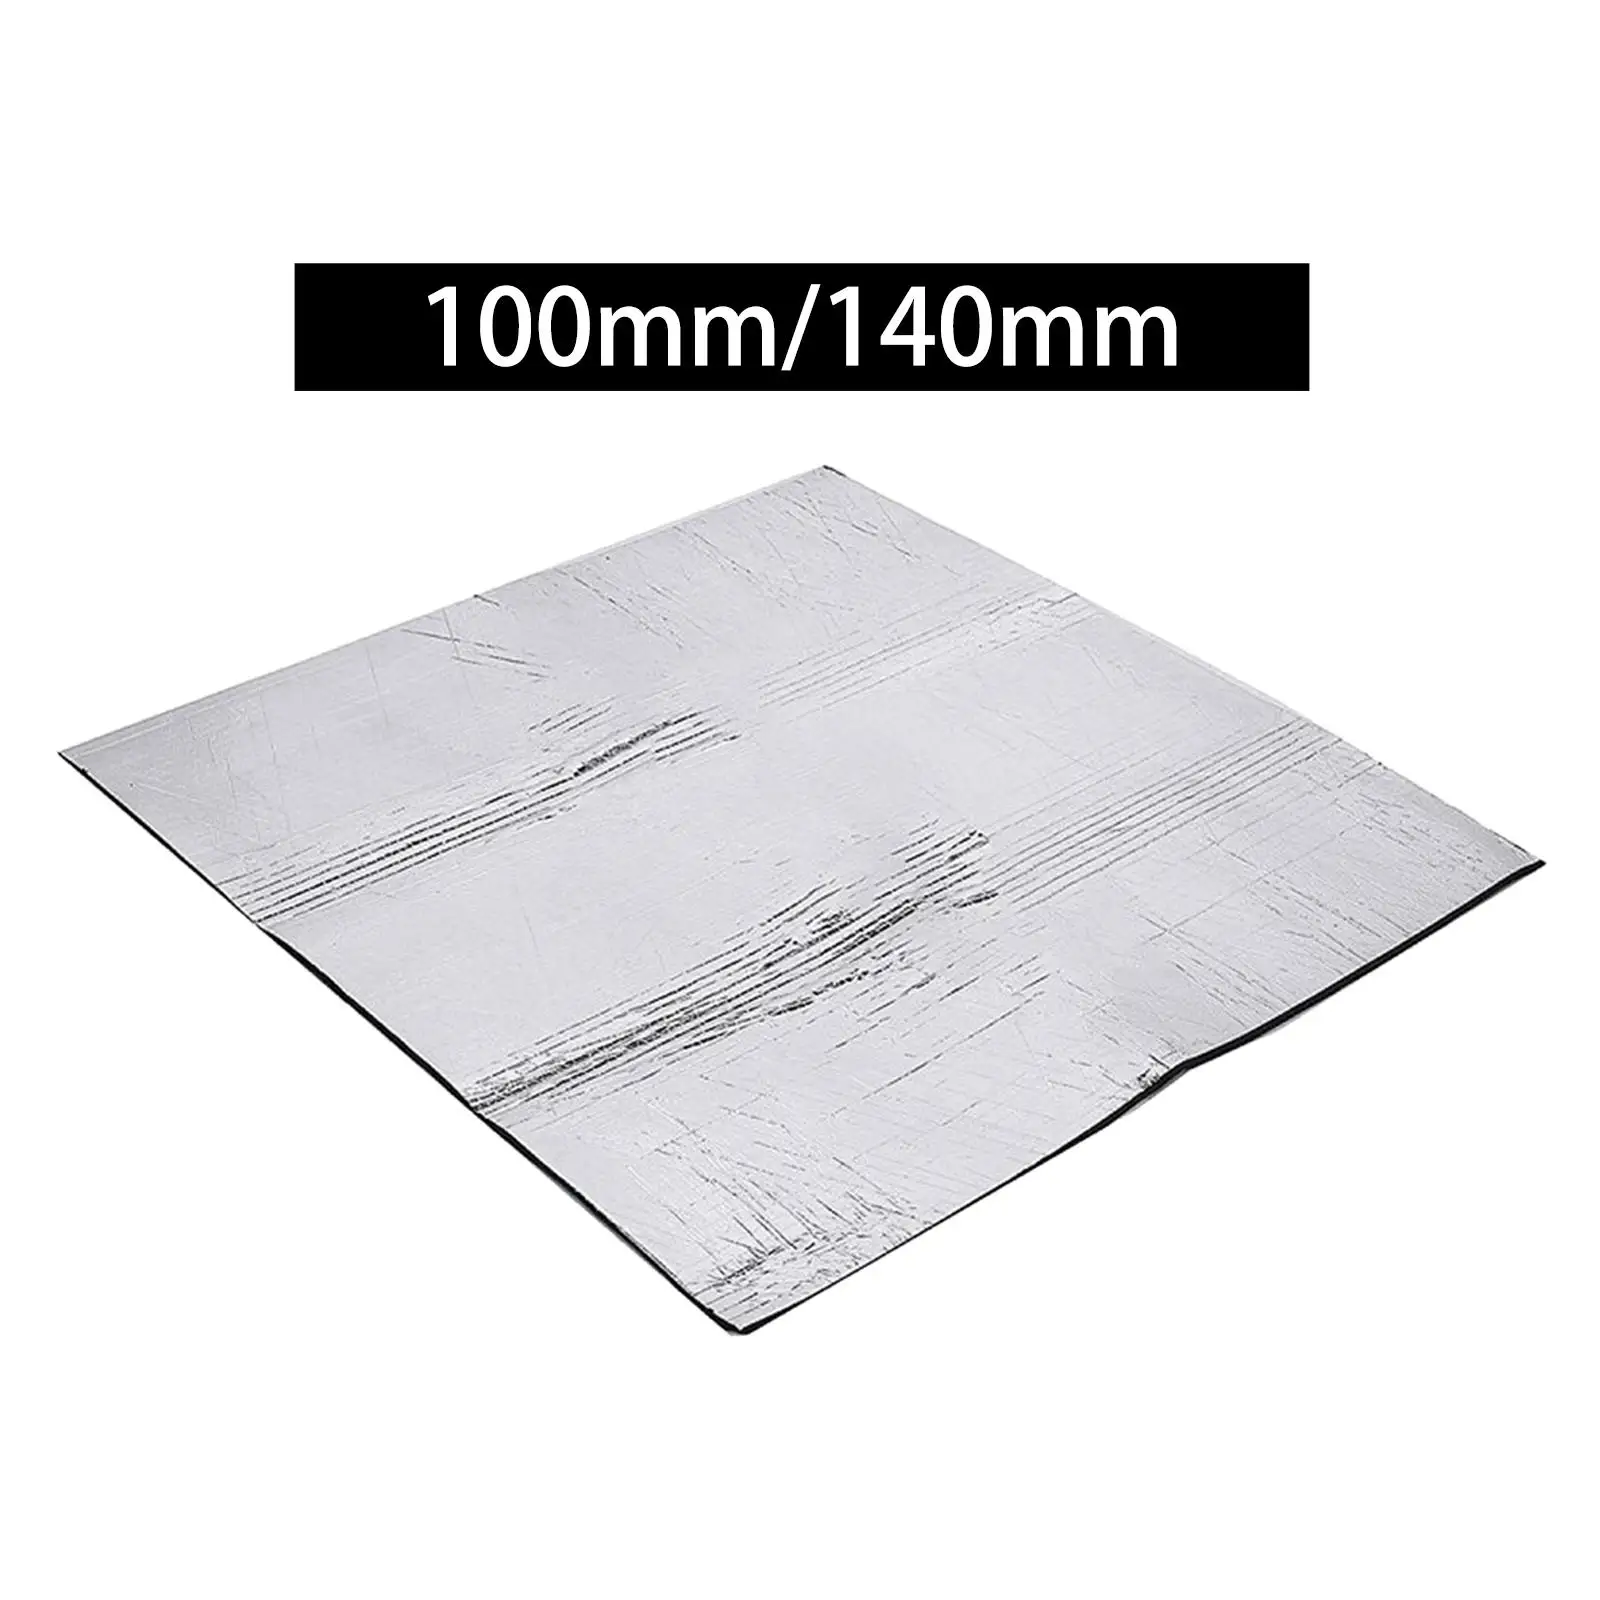 Car Noise Sound Deadener Auto Accessory High Noise Reduction Replacement Easy to Install Durable Sound Deadener Insulation Mat